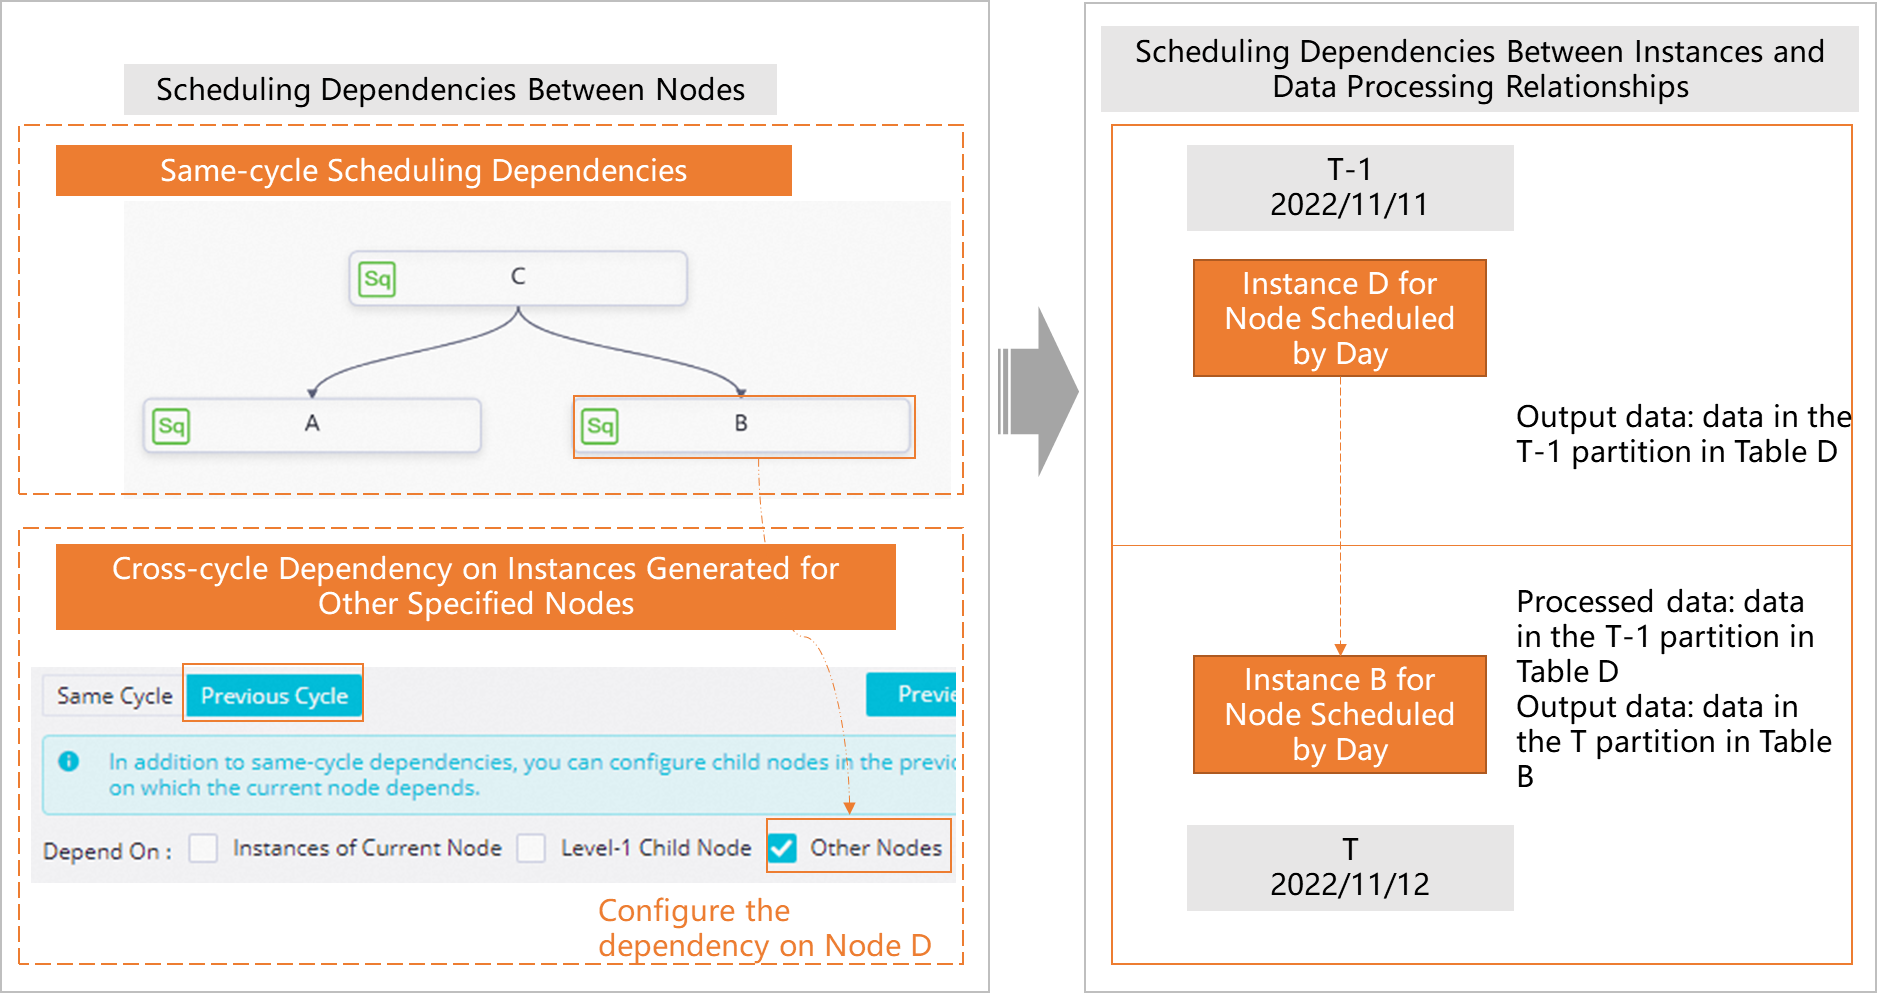 Dependency on the instances generated for one or more specified nodes in the previous cycle